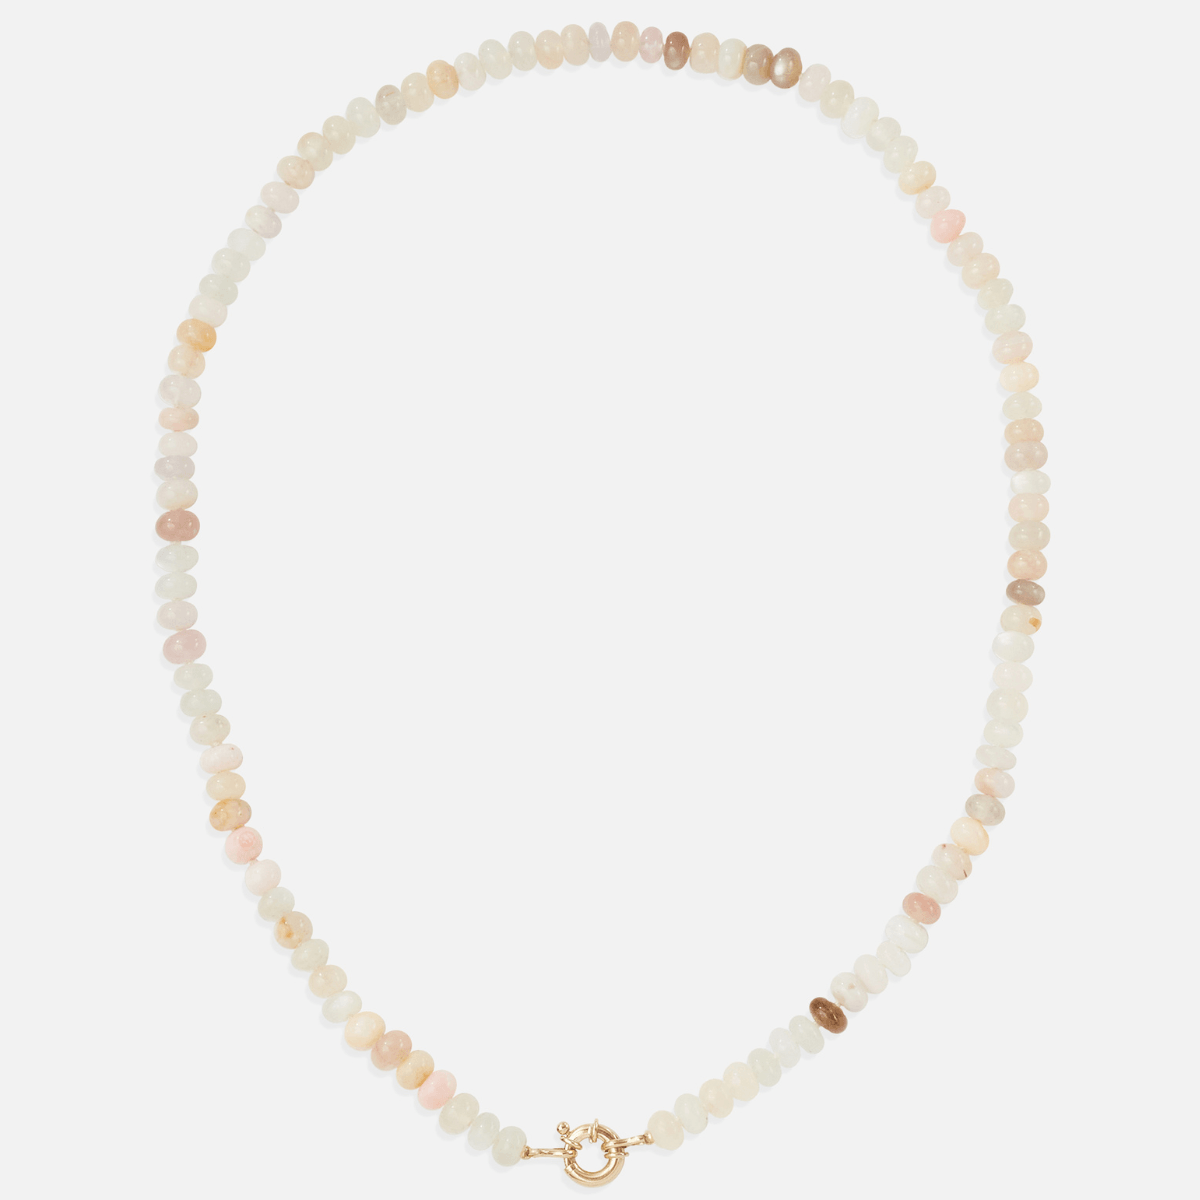 Layered Necklace Spacer Clasp, Gold, Silver or Rose Gold, No More Tangle,  No More Mess. Detangling, Detangled, Layering Magicchristmas Gift 